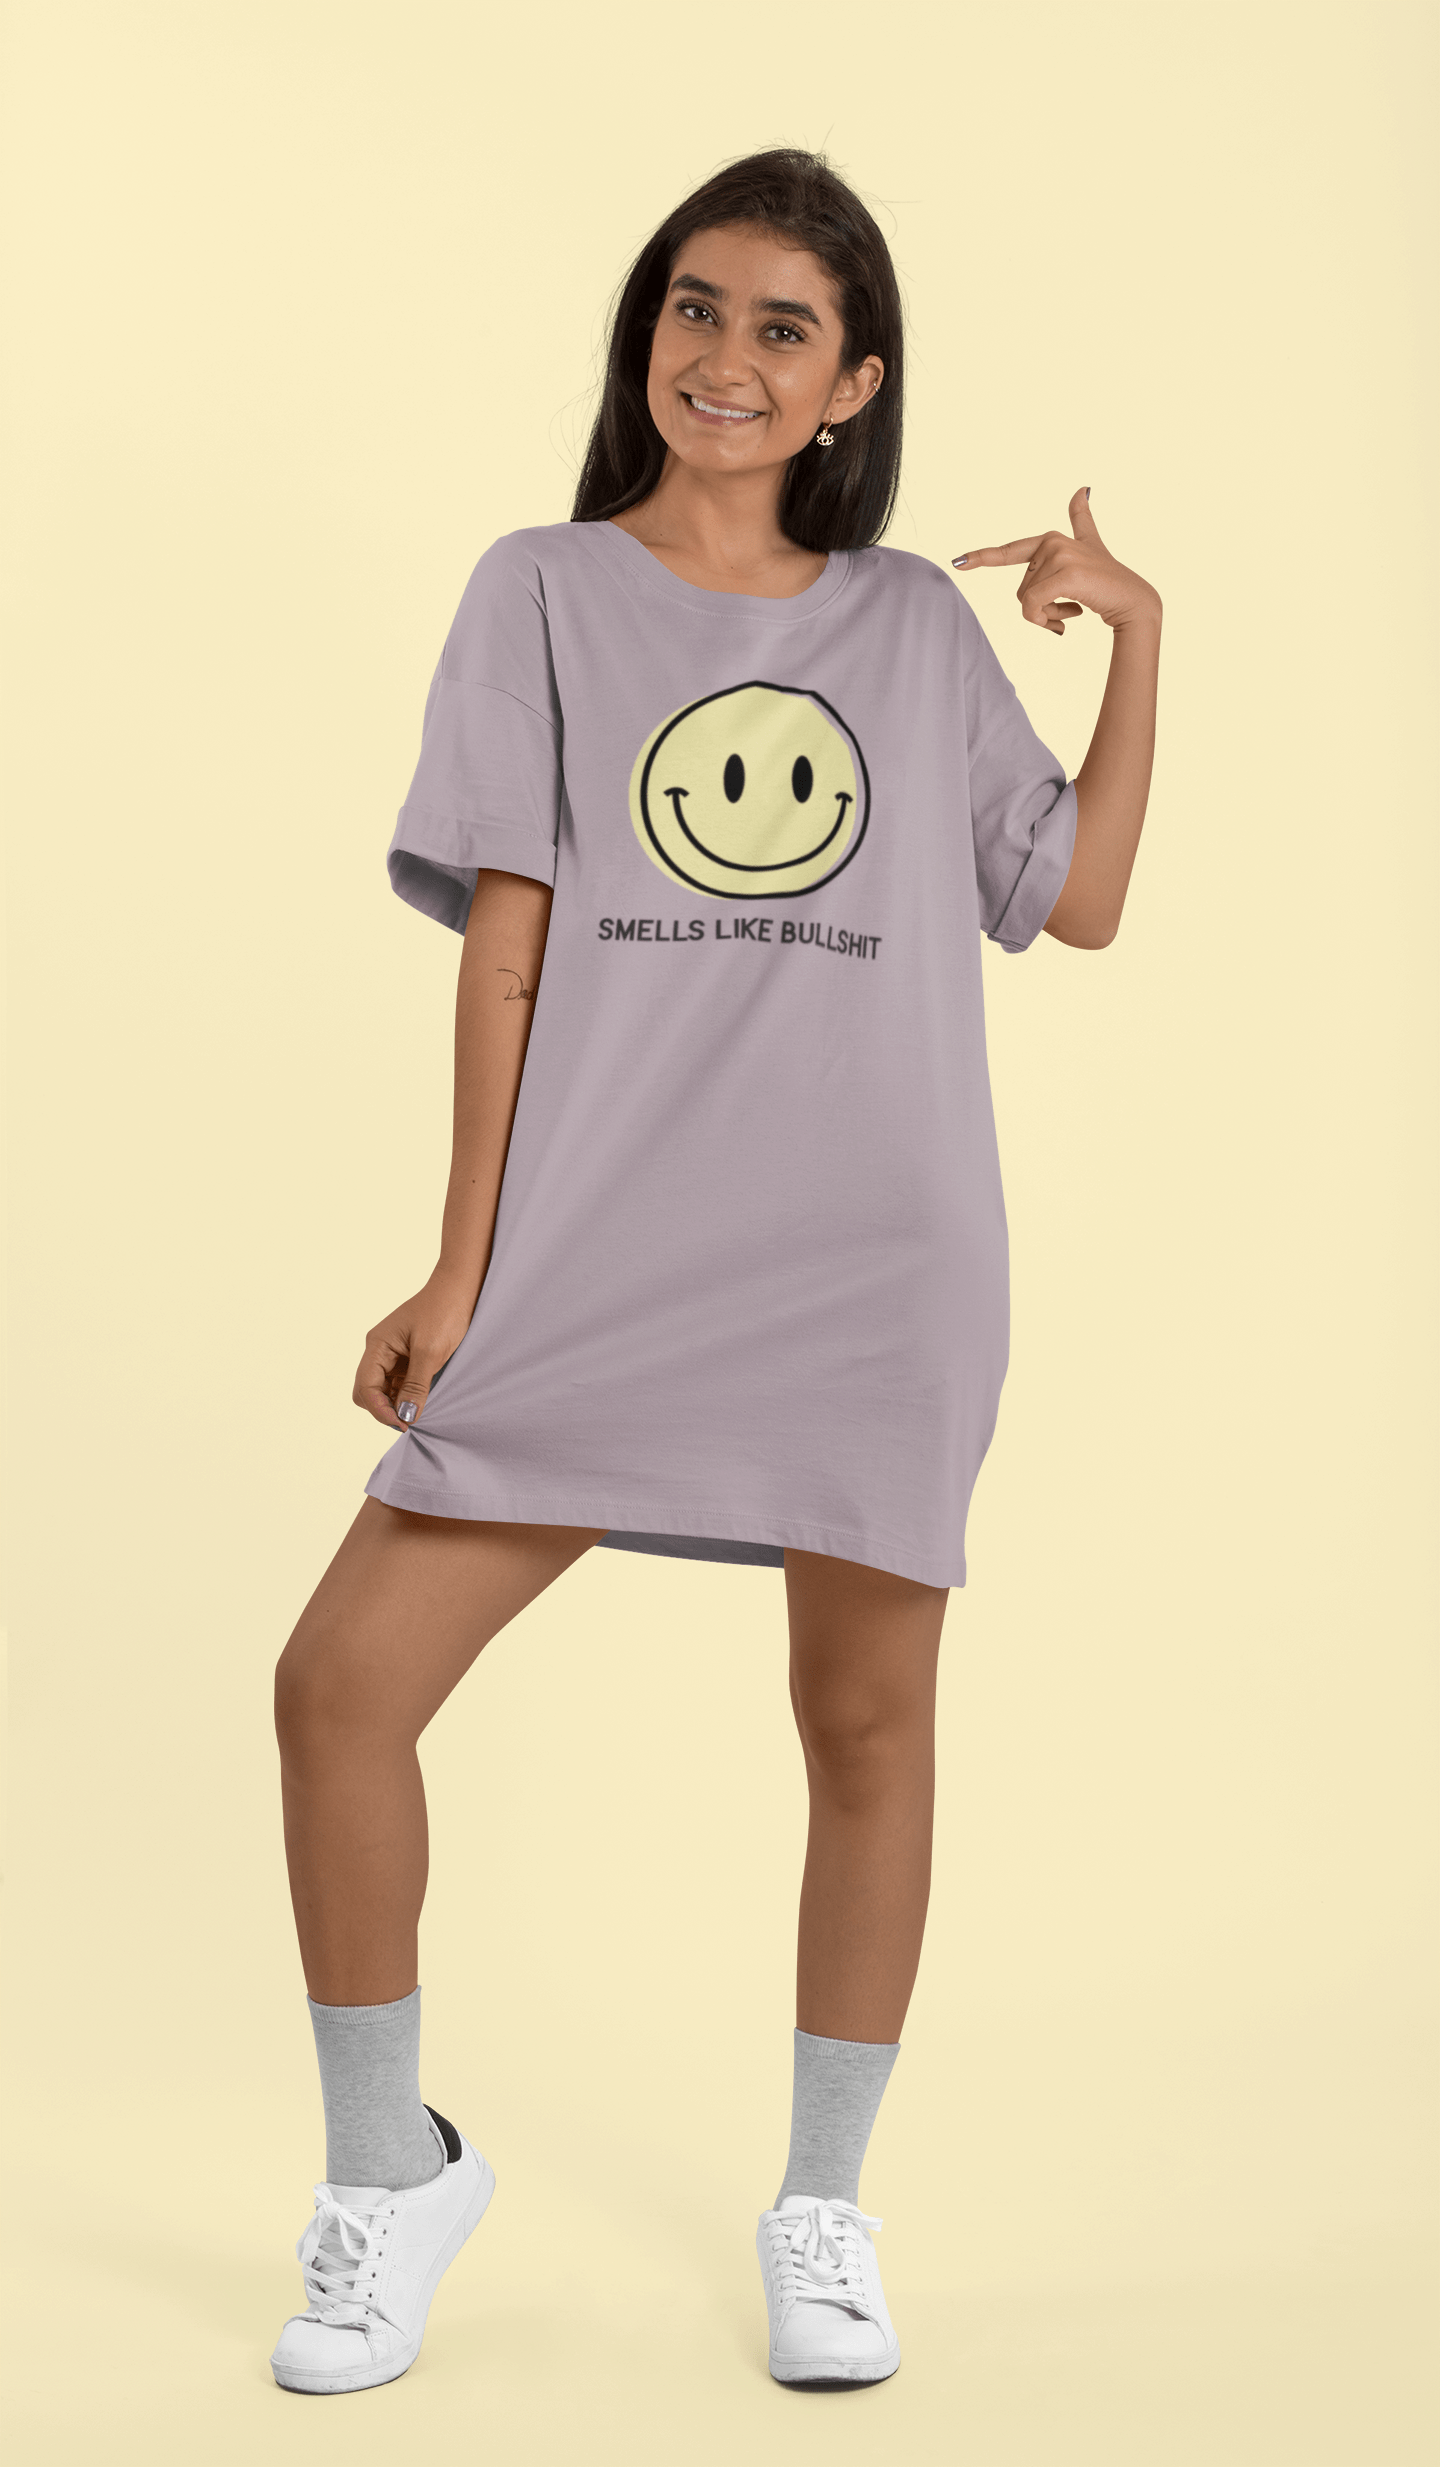 This is The Remix SMELLS LIKE BULLSH*IT (Smiley Face) - Oversized T-Shirt Dress